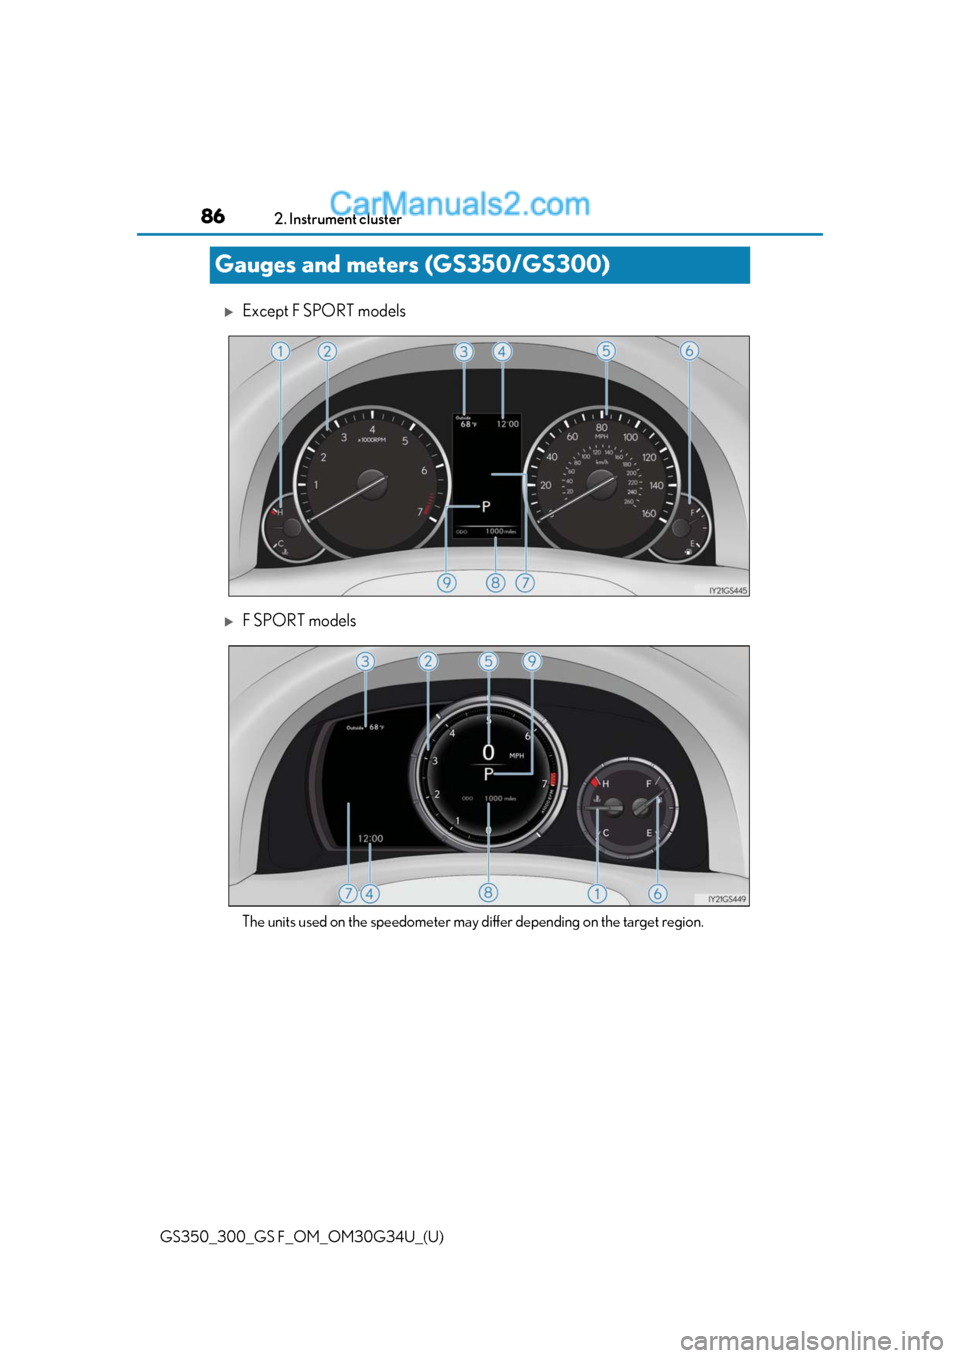 Lexus GS350 2018  Owners Manual 86
GS350_300_GS F_OM_OM30G34U_(U)2. Instrument cluster
Gauges and meters (GS350/GS300)
Except F SPORT models
F SPORT models
The units used on the speedometer may differ depending on the target r